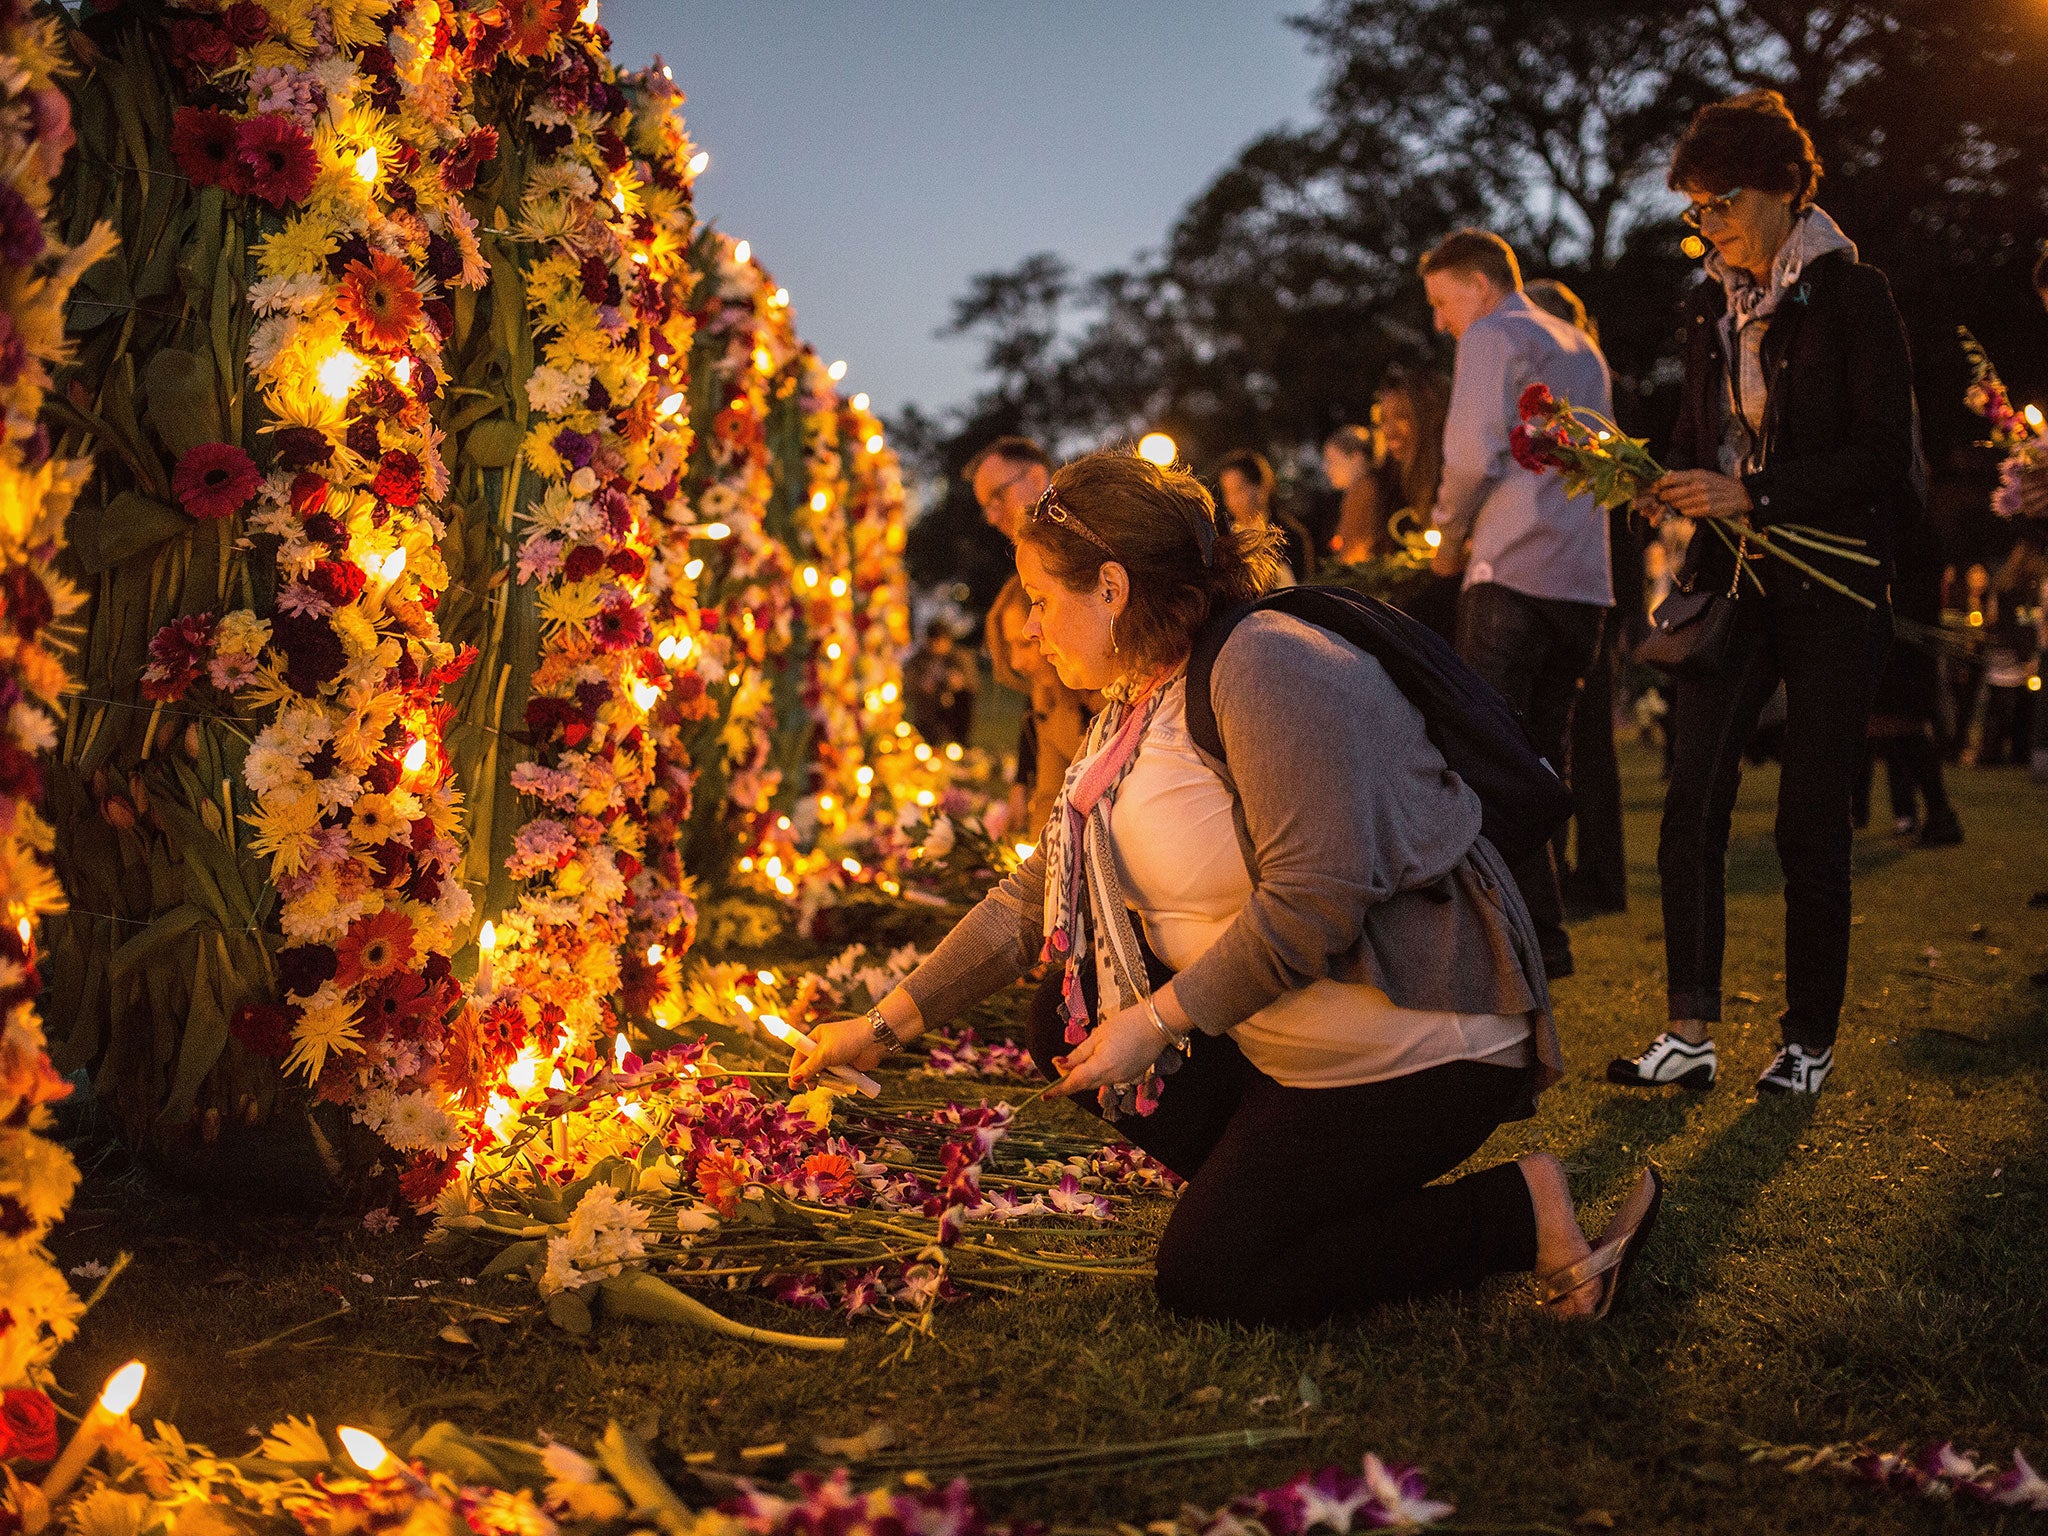 A woman places a tribute on a flower wall that reads '#keephopealive' as part of an Amnesty international vigil for the Bali 9 duo, Andrew Chan and Myuran Sukumaran in a last ditch effort to sway the Indonesian Government to halt the planned executions of the two, in Sydney, Australia. Chan is one of the nine Australians accused by Indonesian Police of drug trafficking